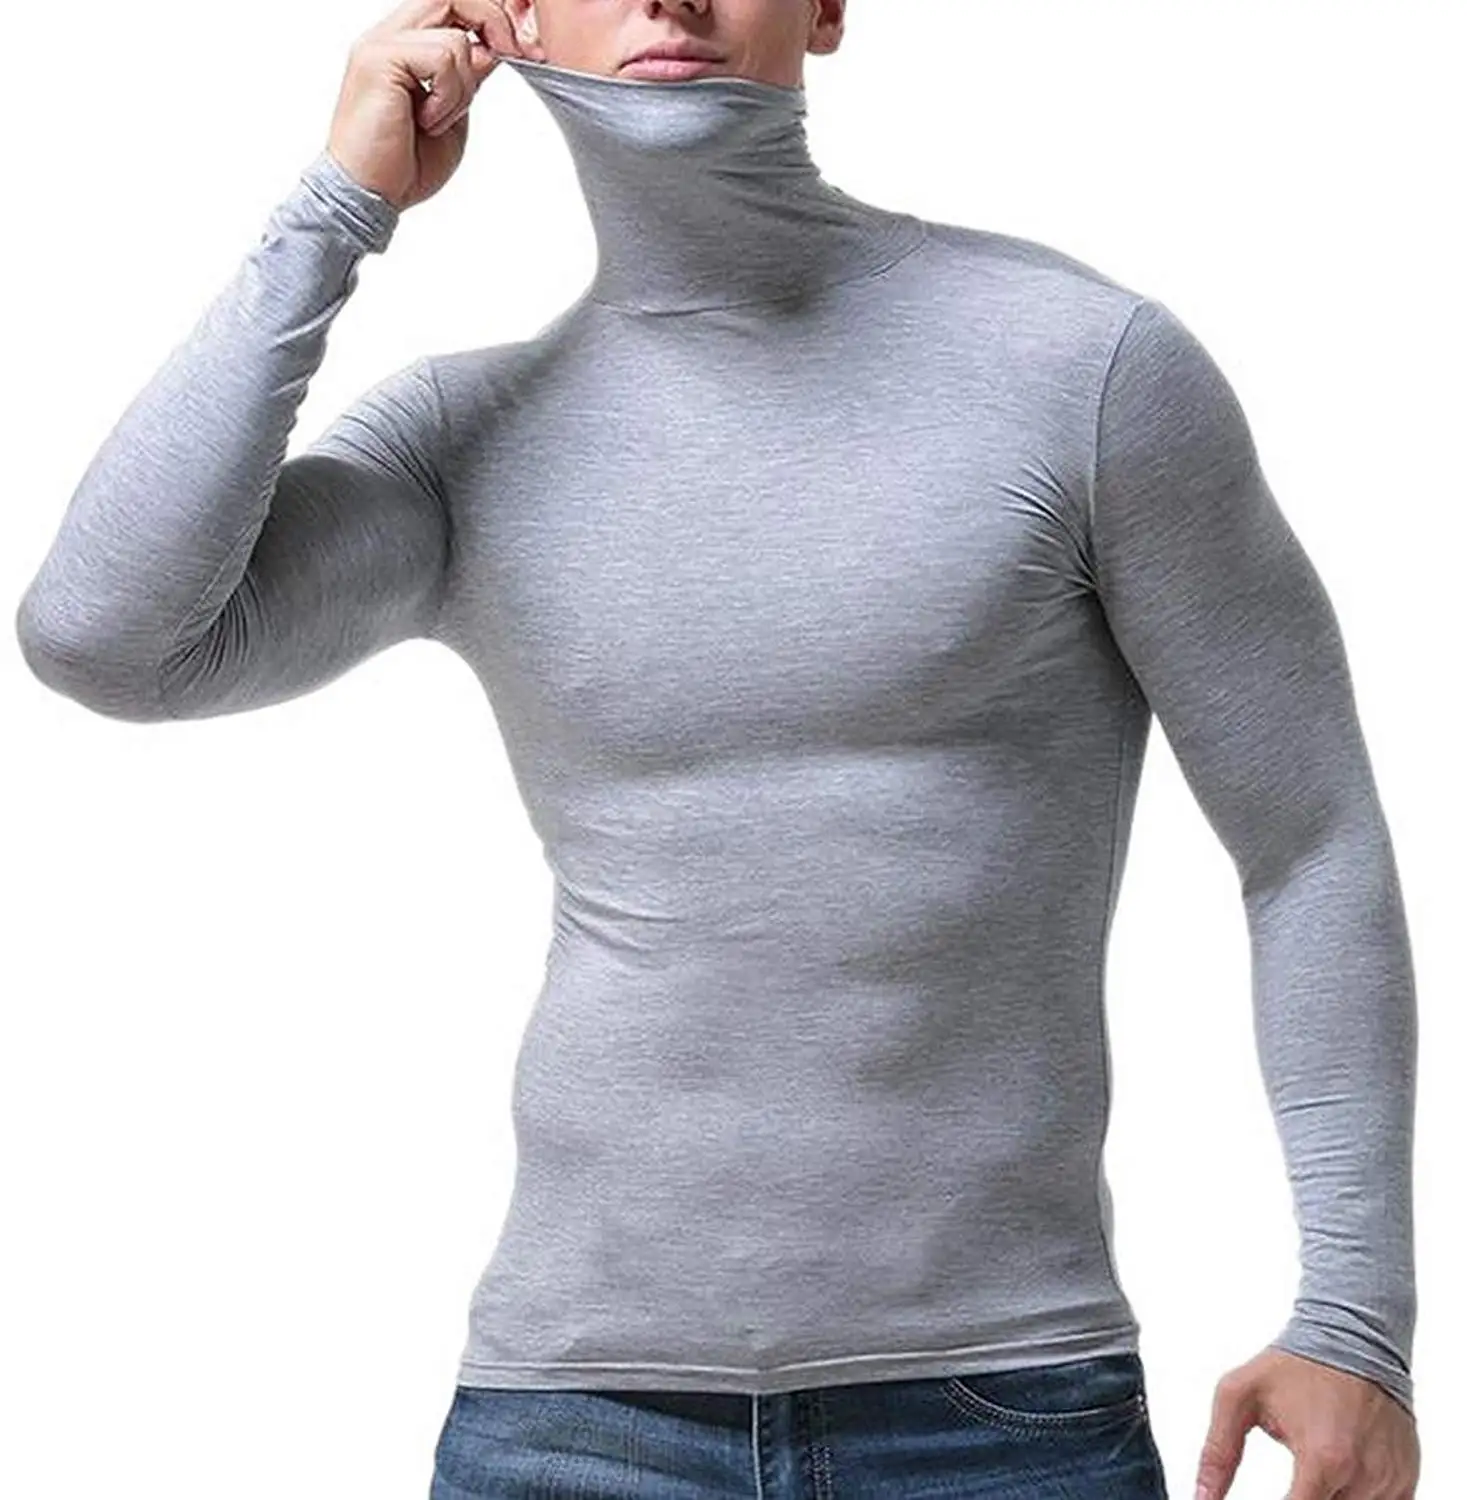 mens thermal underwear shirts - 54% OFF 